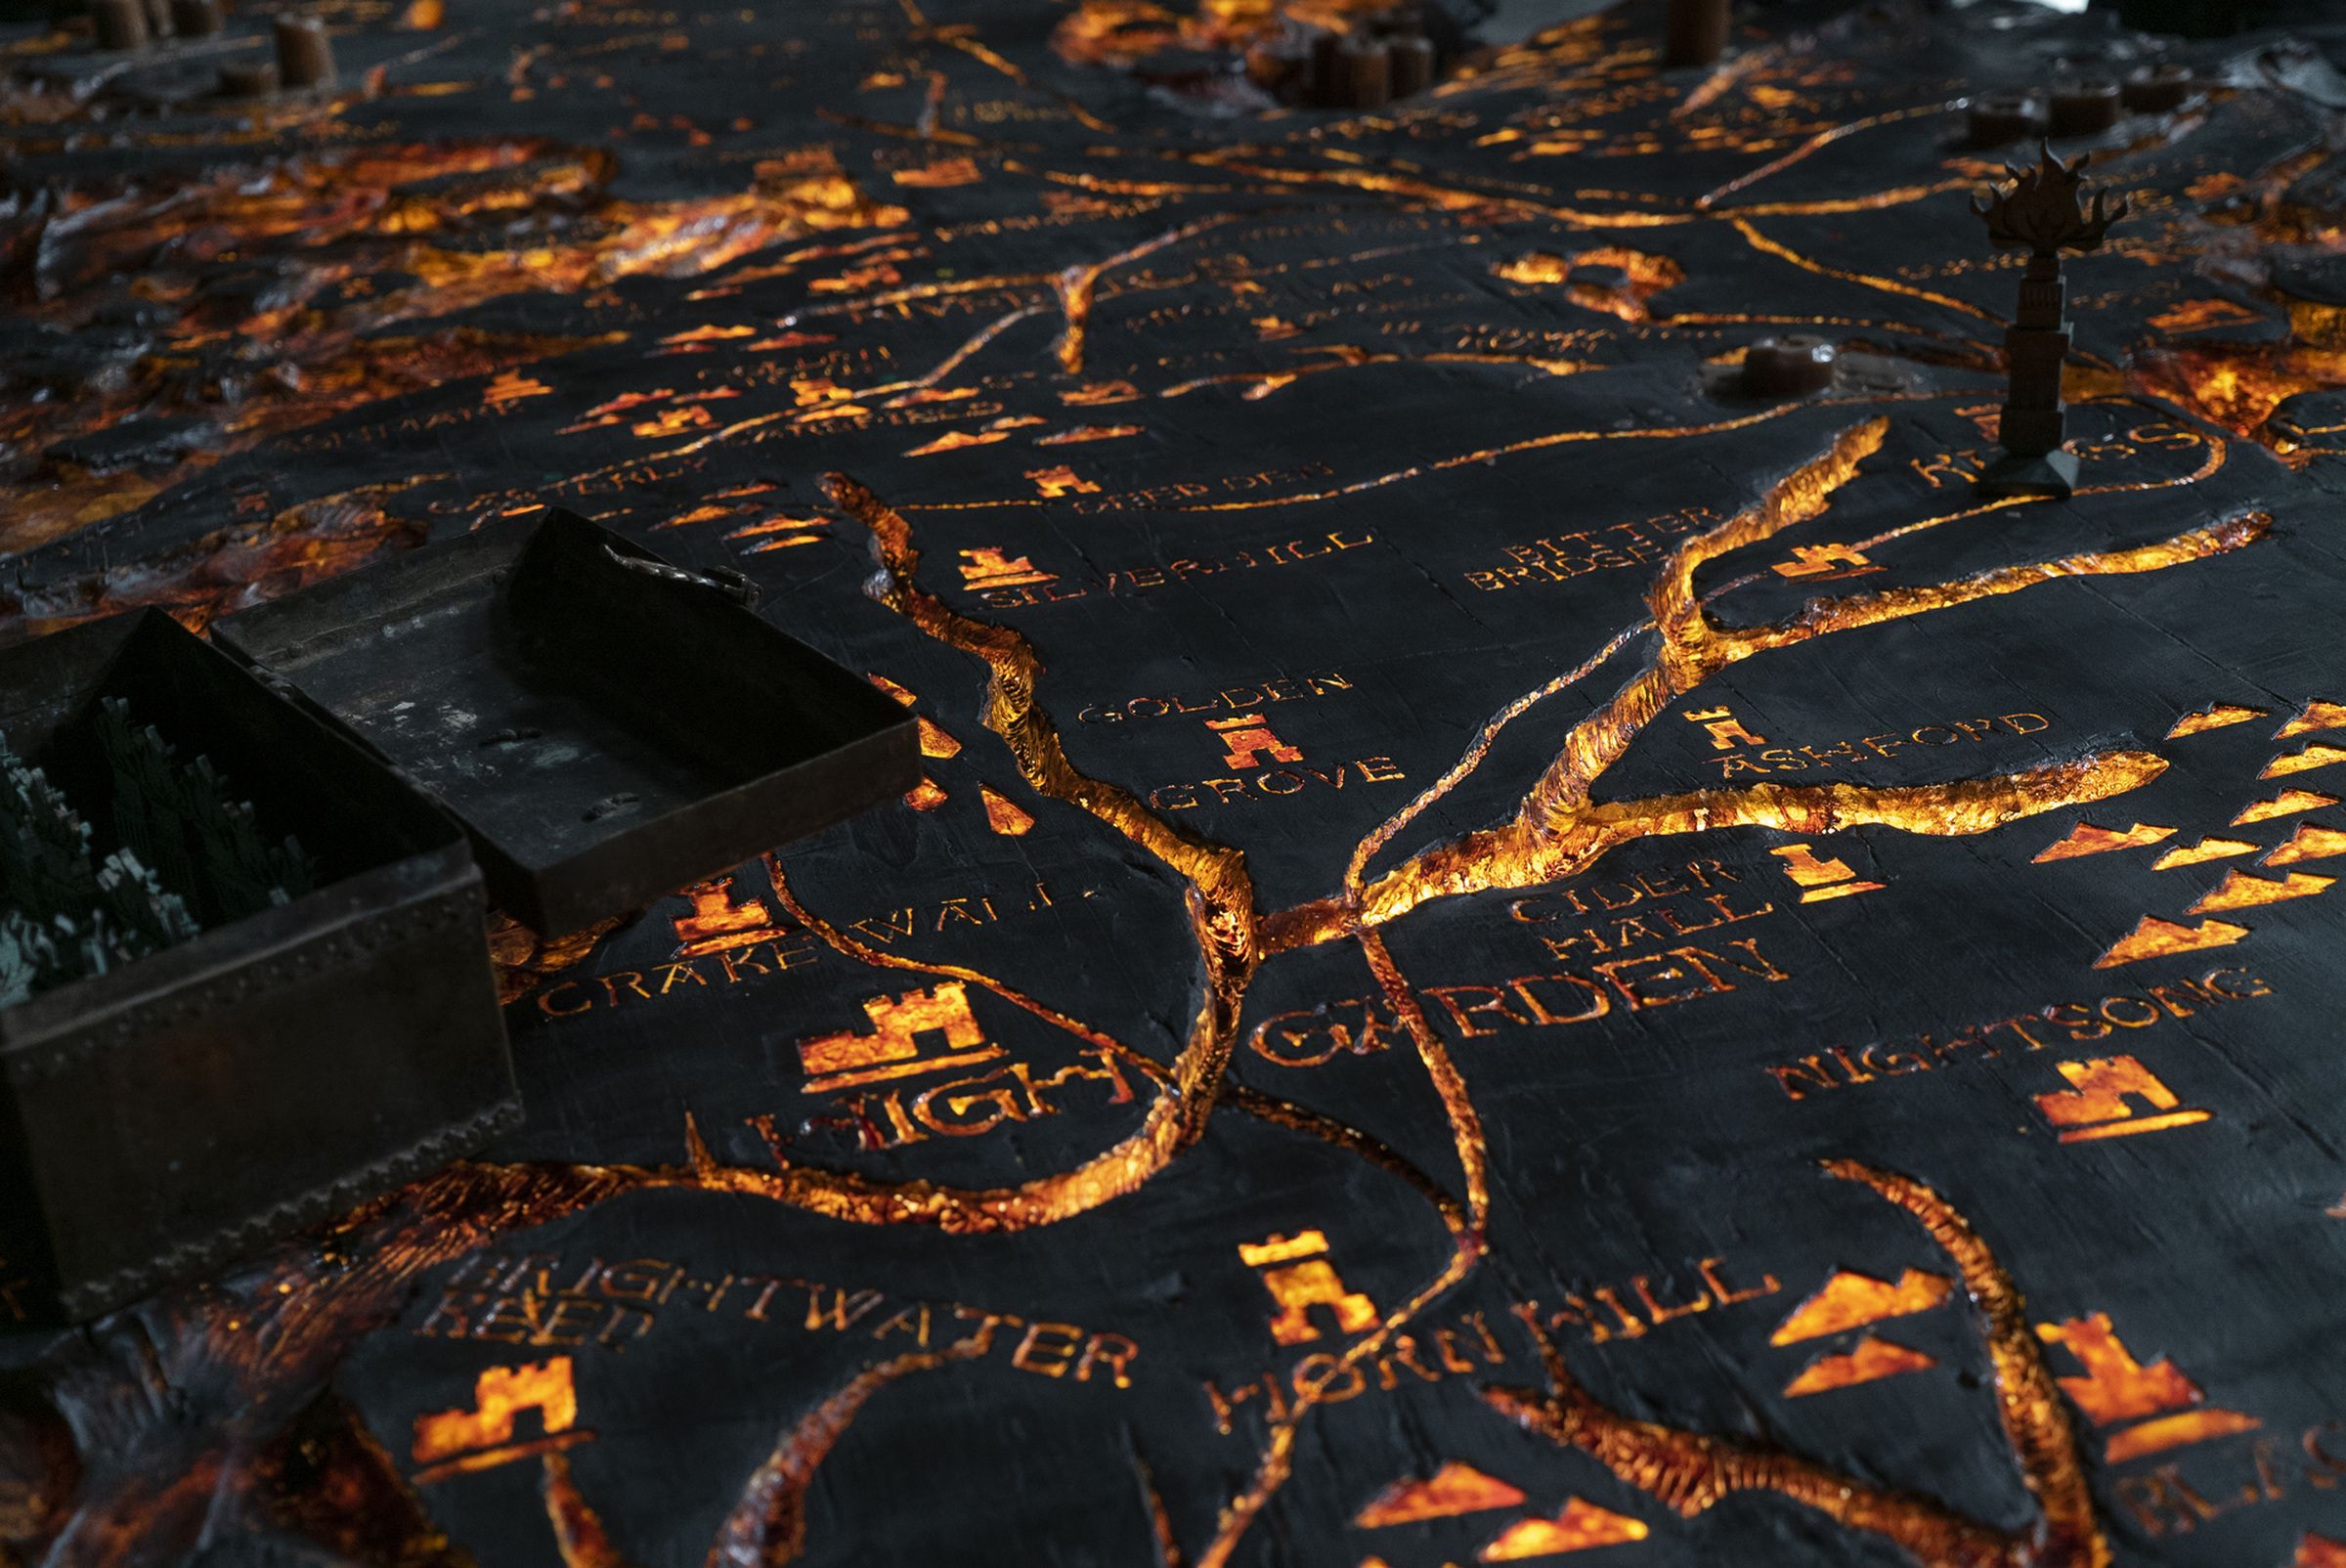 A wooden table into which a map is carved of Westeros. The carved, etched grooves of the map glow golden with a warm light.